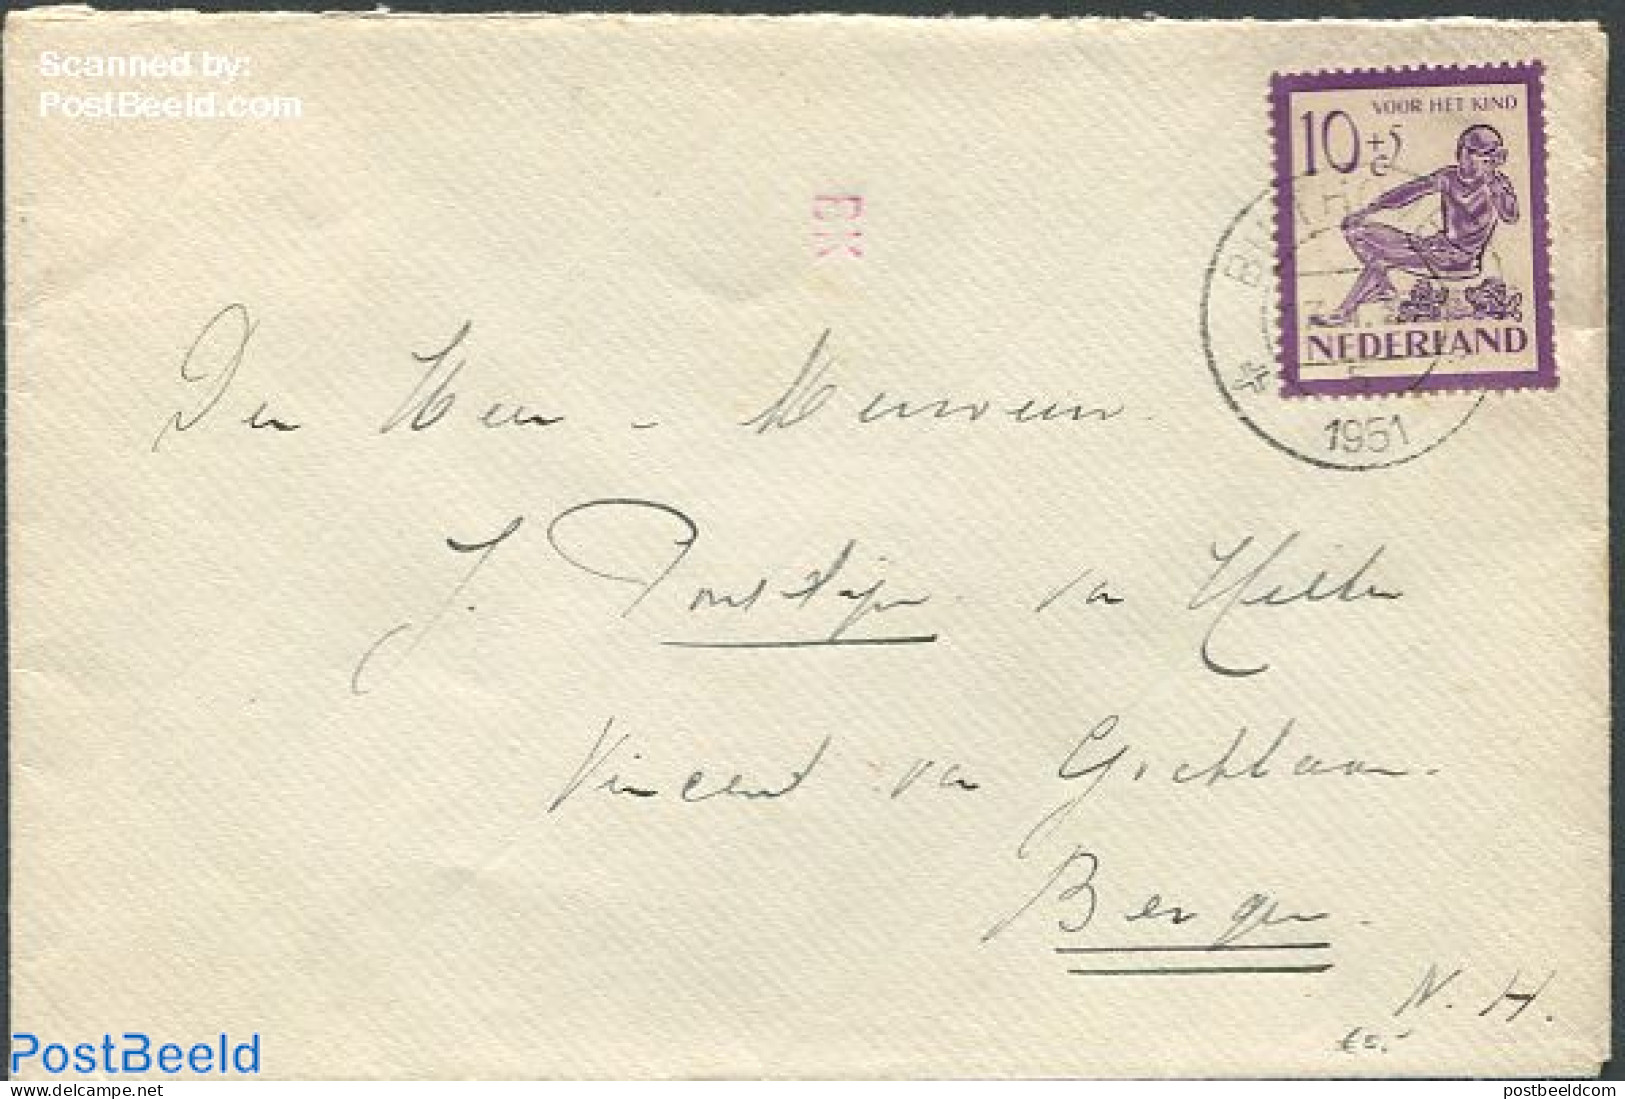 Netherlands 1950 Cover From Bilthoven To Bergen With Nvhp No.566, Postal History, Art - Children Drawings - Covers & Documents